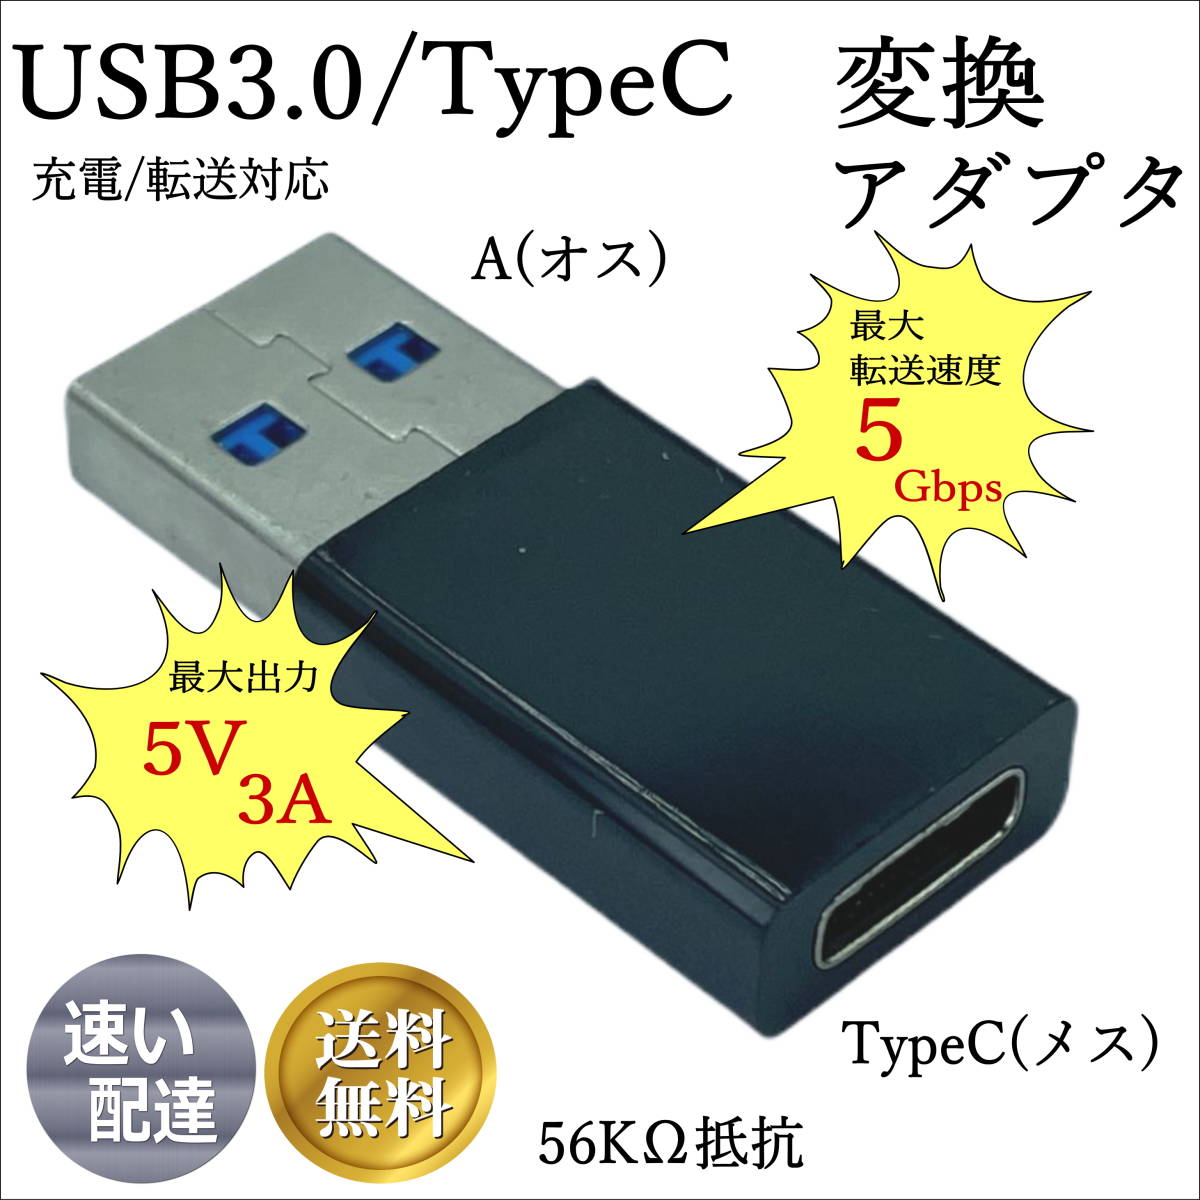 ★ USB3.0 TypeC(メス)-A(オス) 変換アダプタ 5V3A 5Gbps UC3A ■